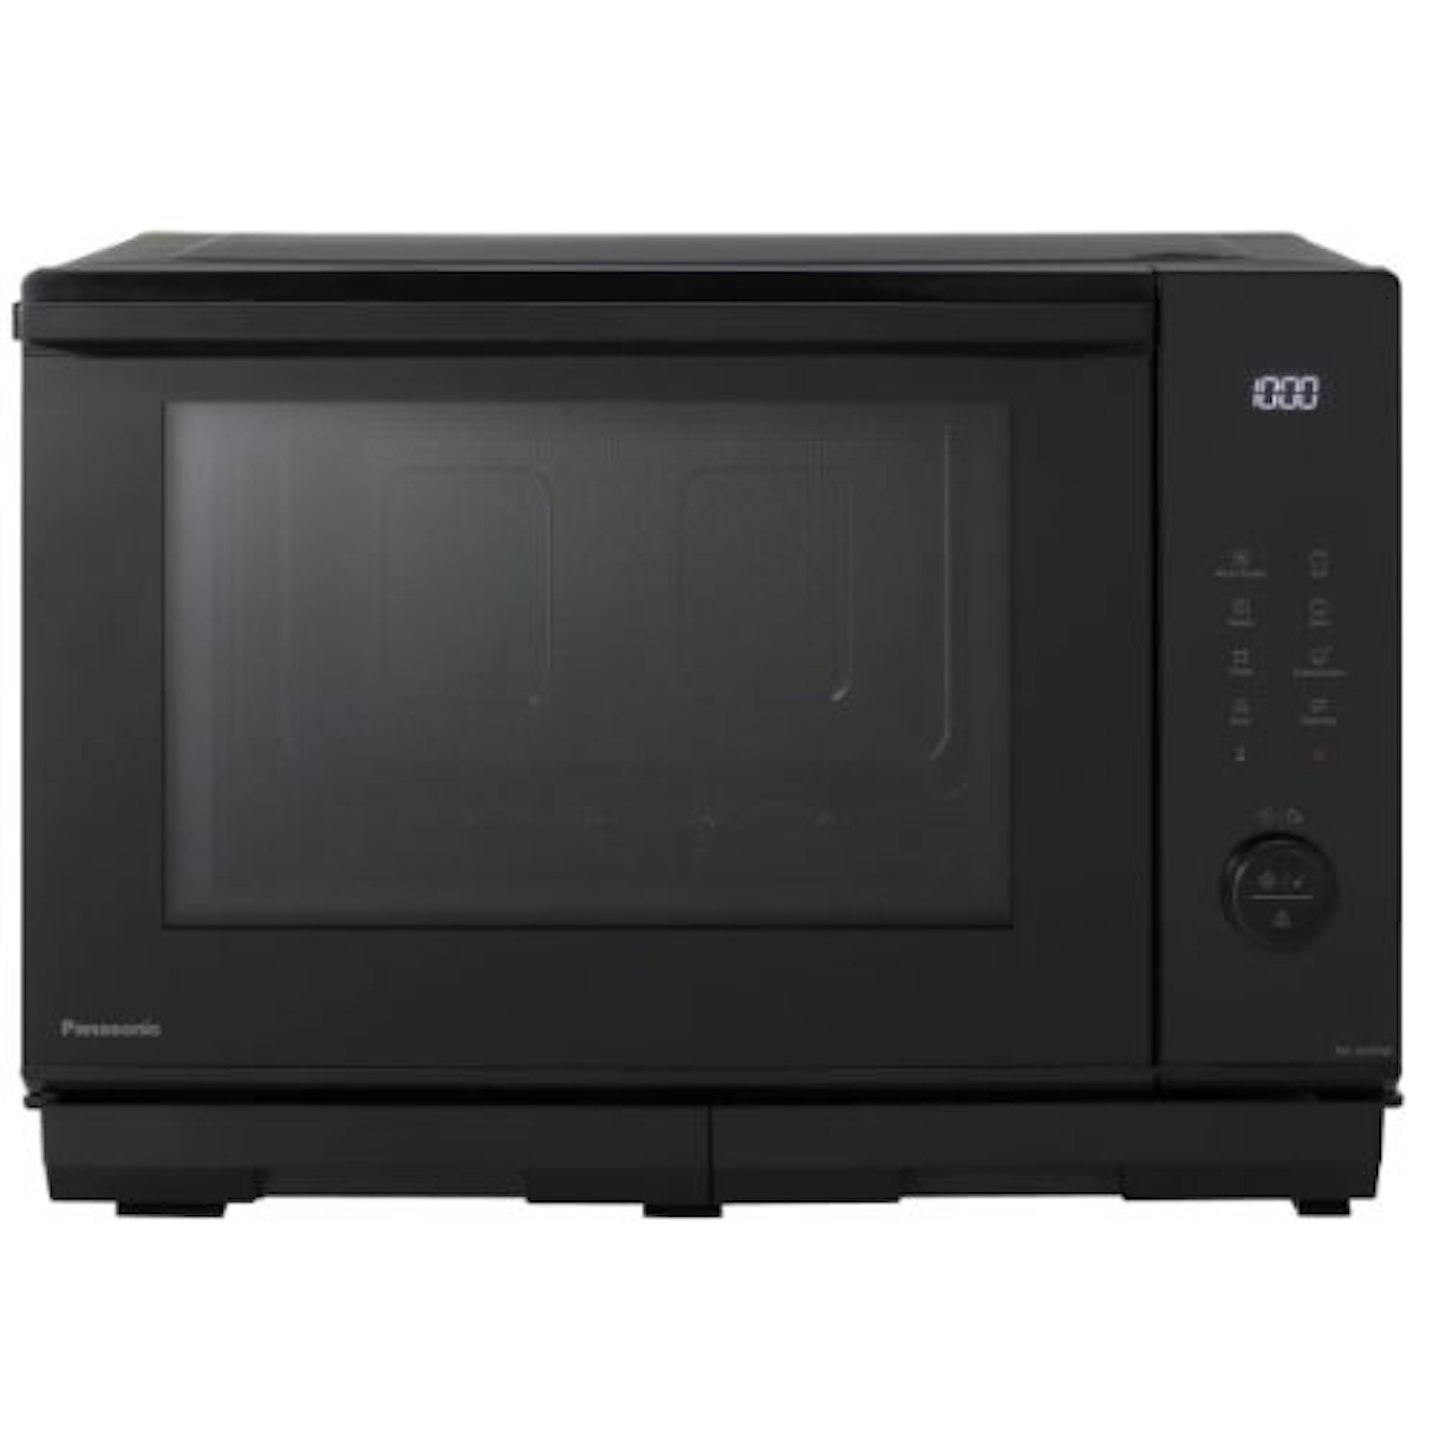 Panasonic 4-in-1 Steam NN-DS59NBBPQ 27 Litre Combination Microwave